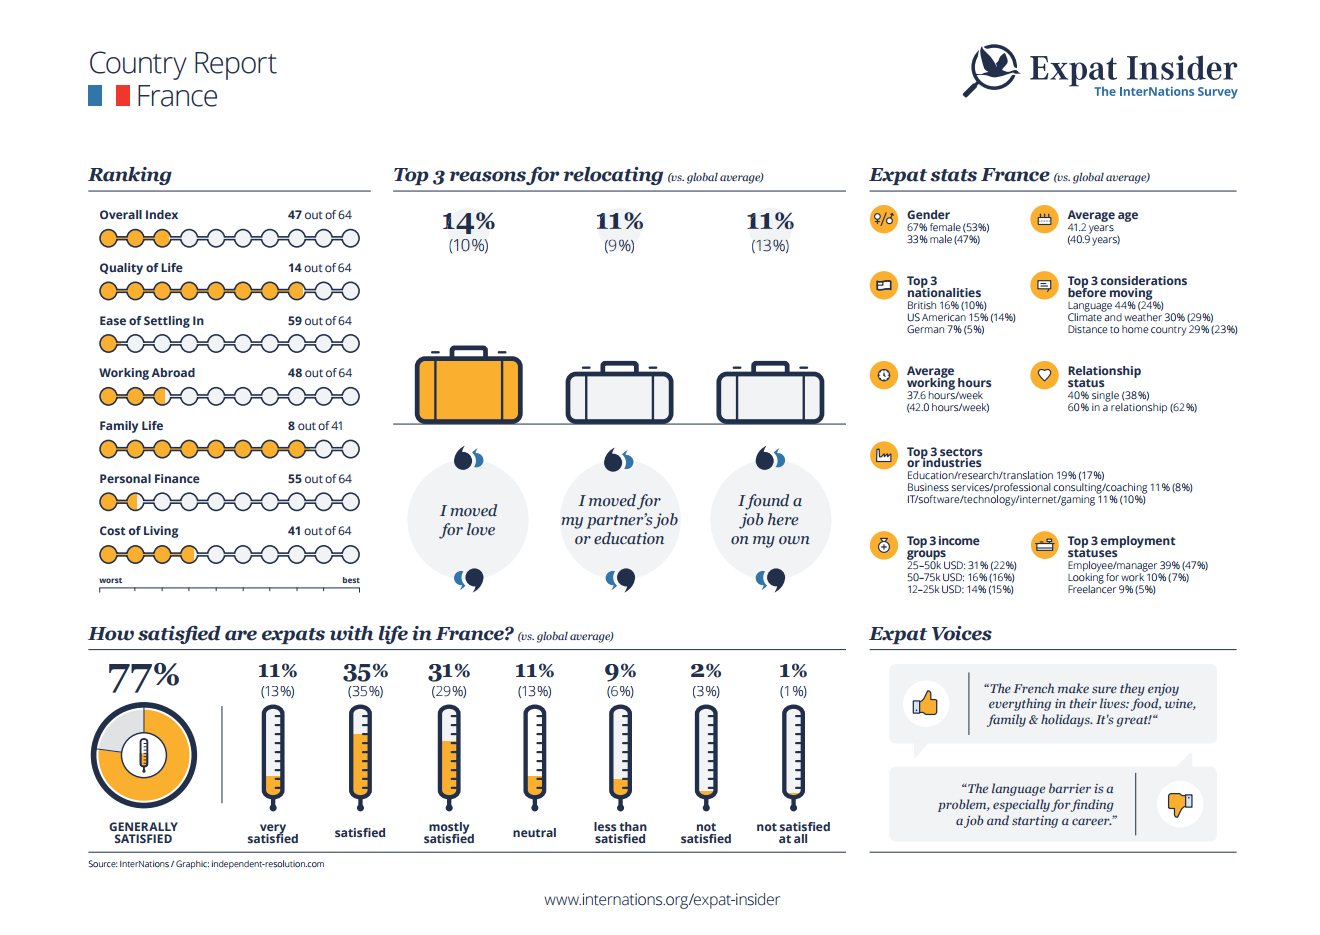 Expat statistics for France - infographic